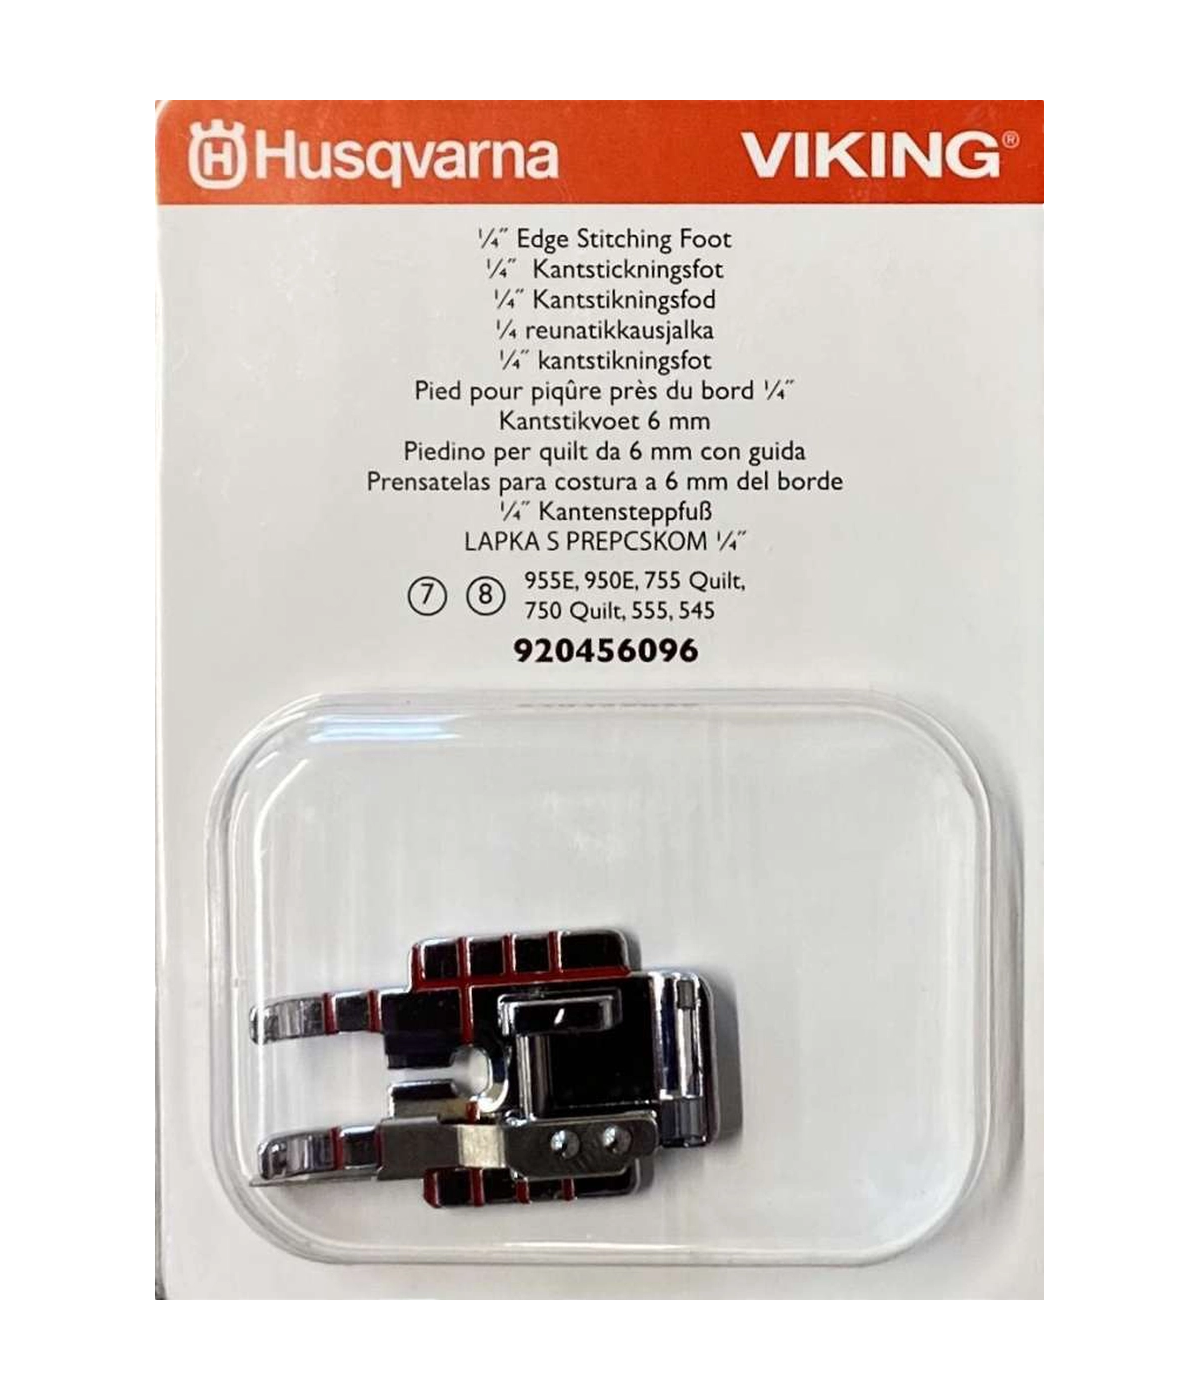 Husqvarna Viking Adjustable 1/4" Edge Stitching Foot with Guide 920456096 for Sale at World Weidner